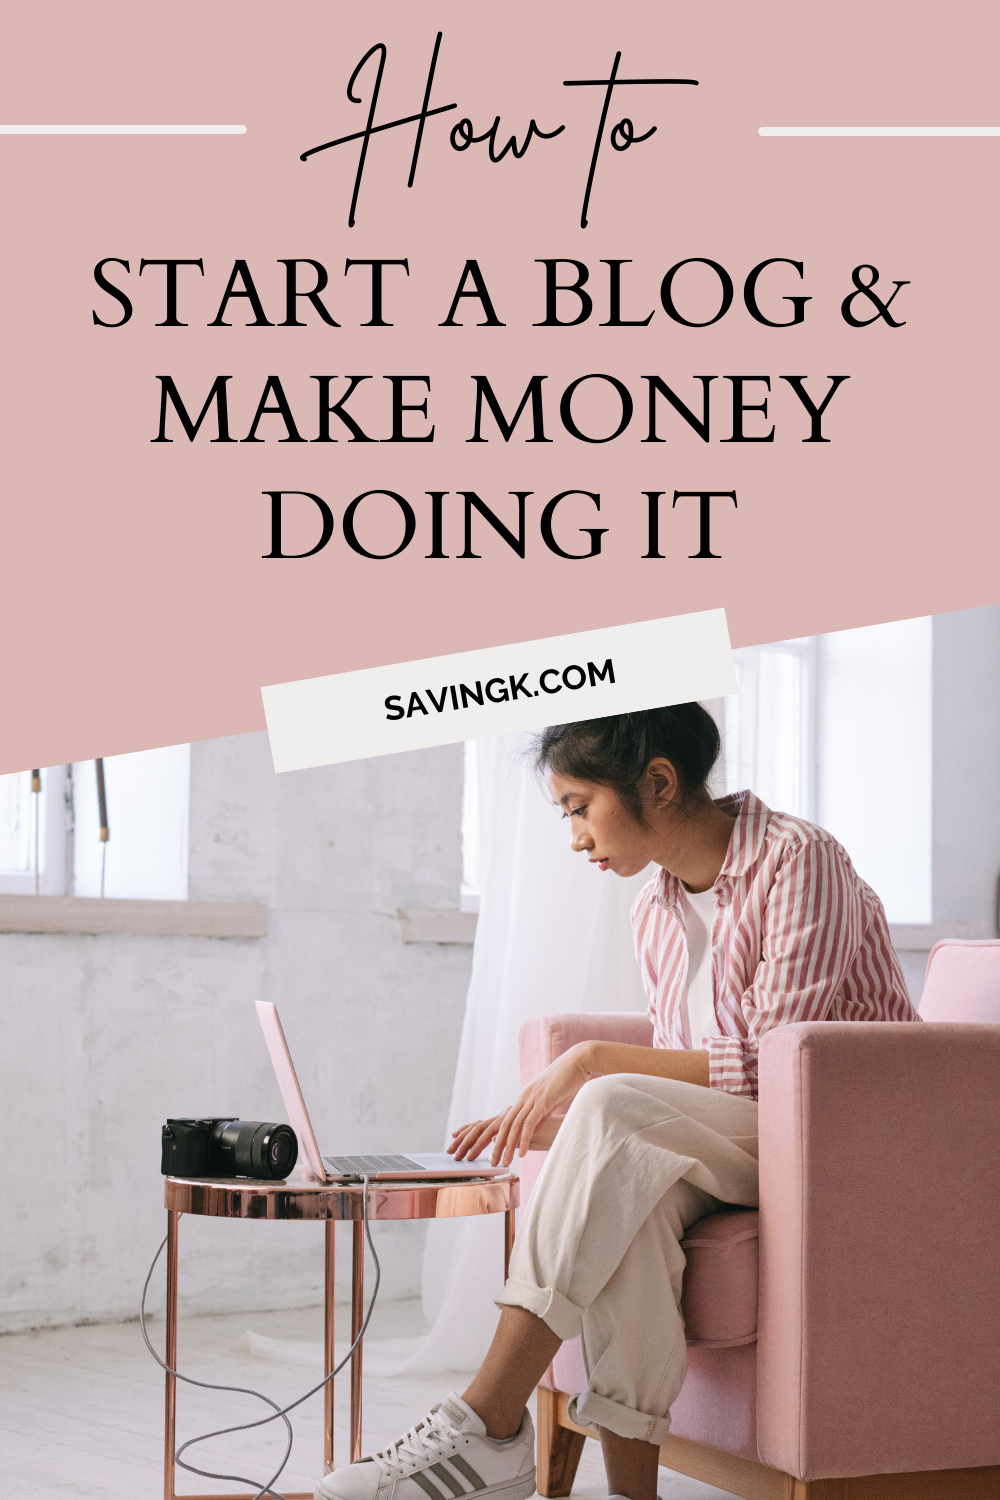 How to Start a Blog and Make Money Doing It